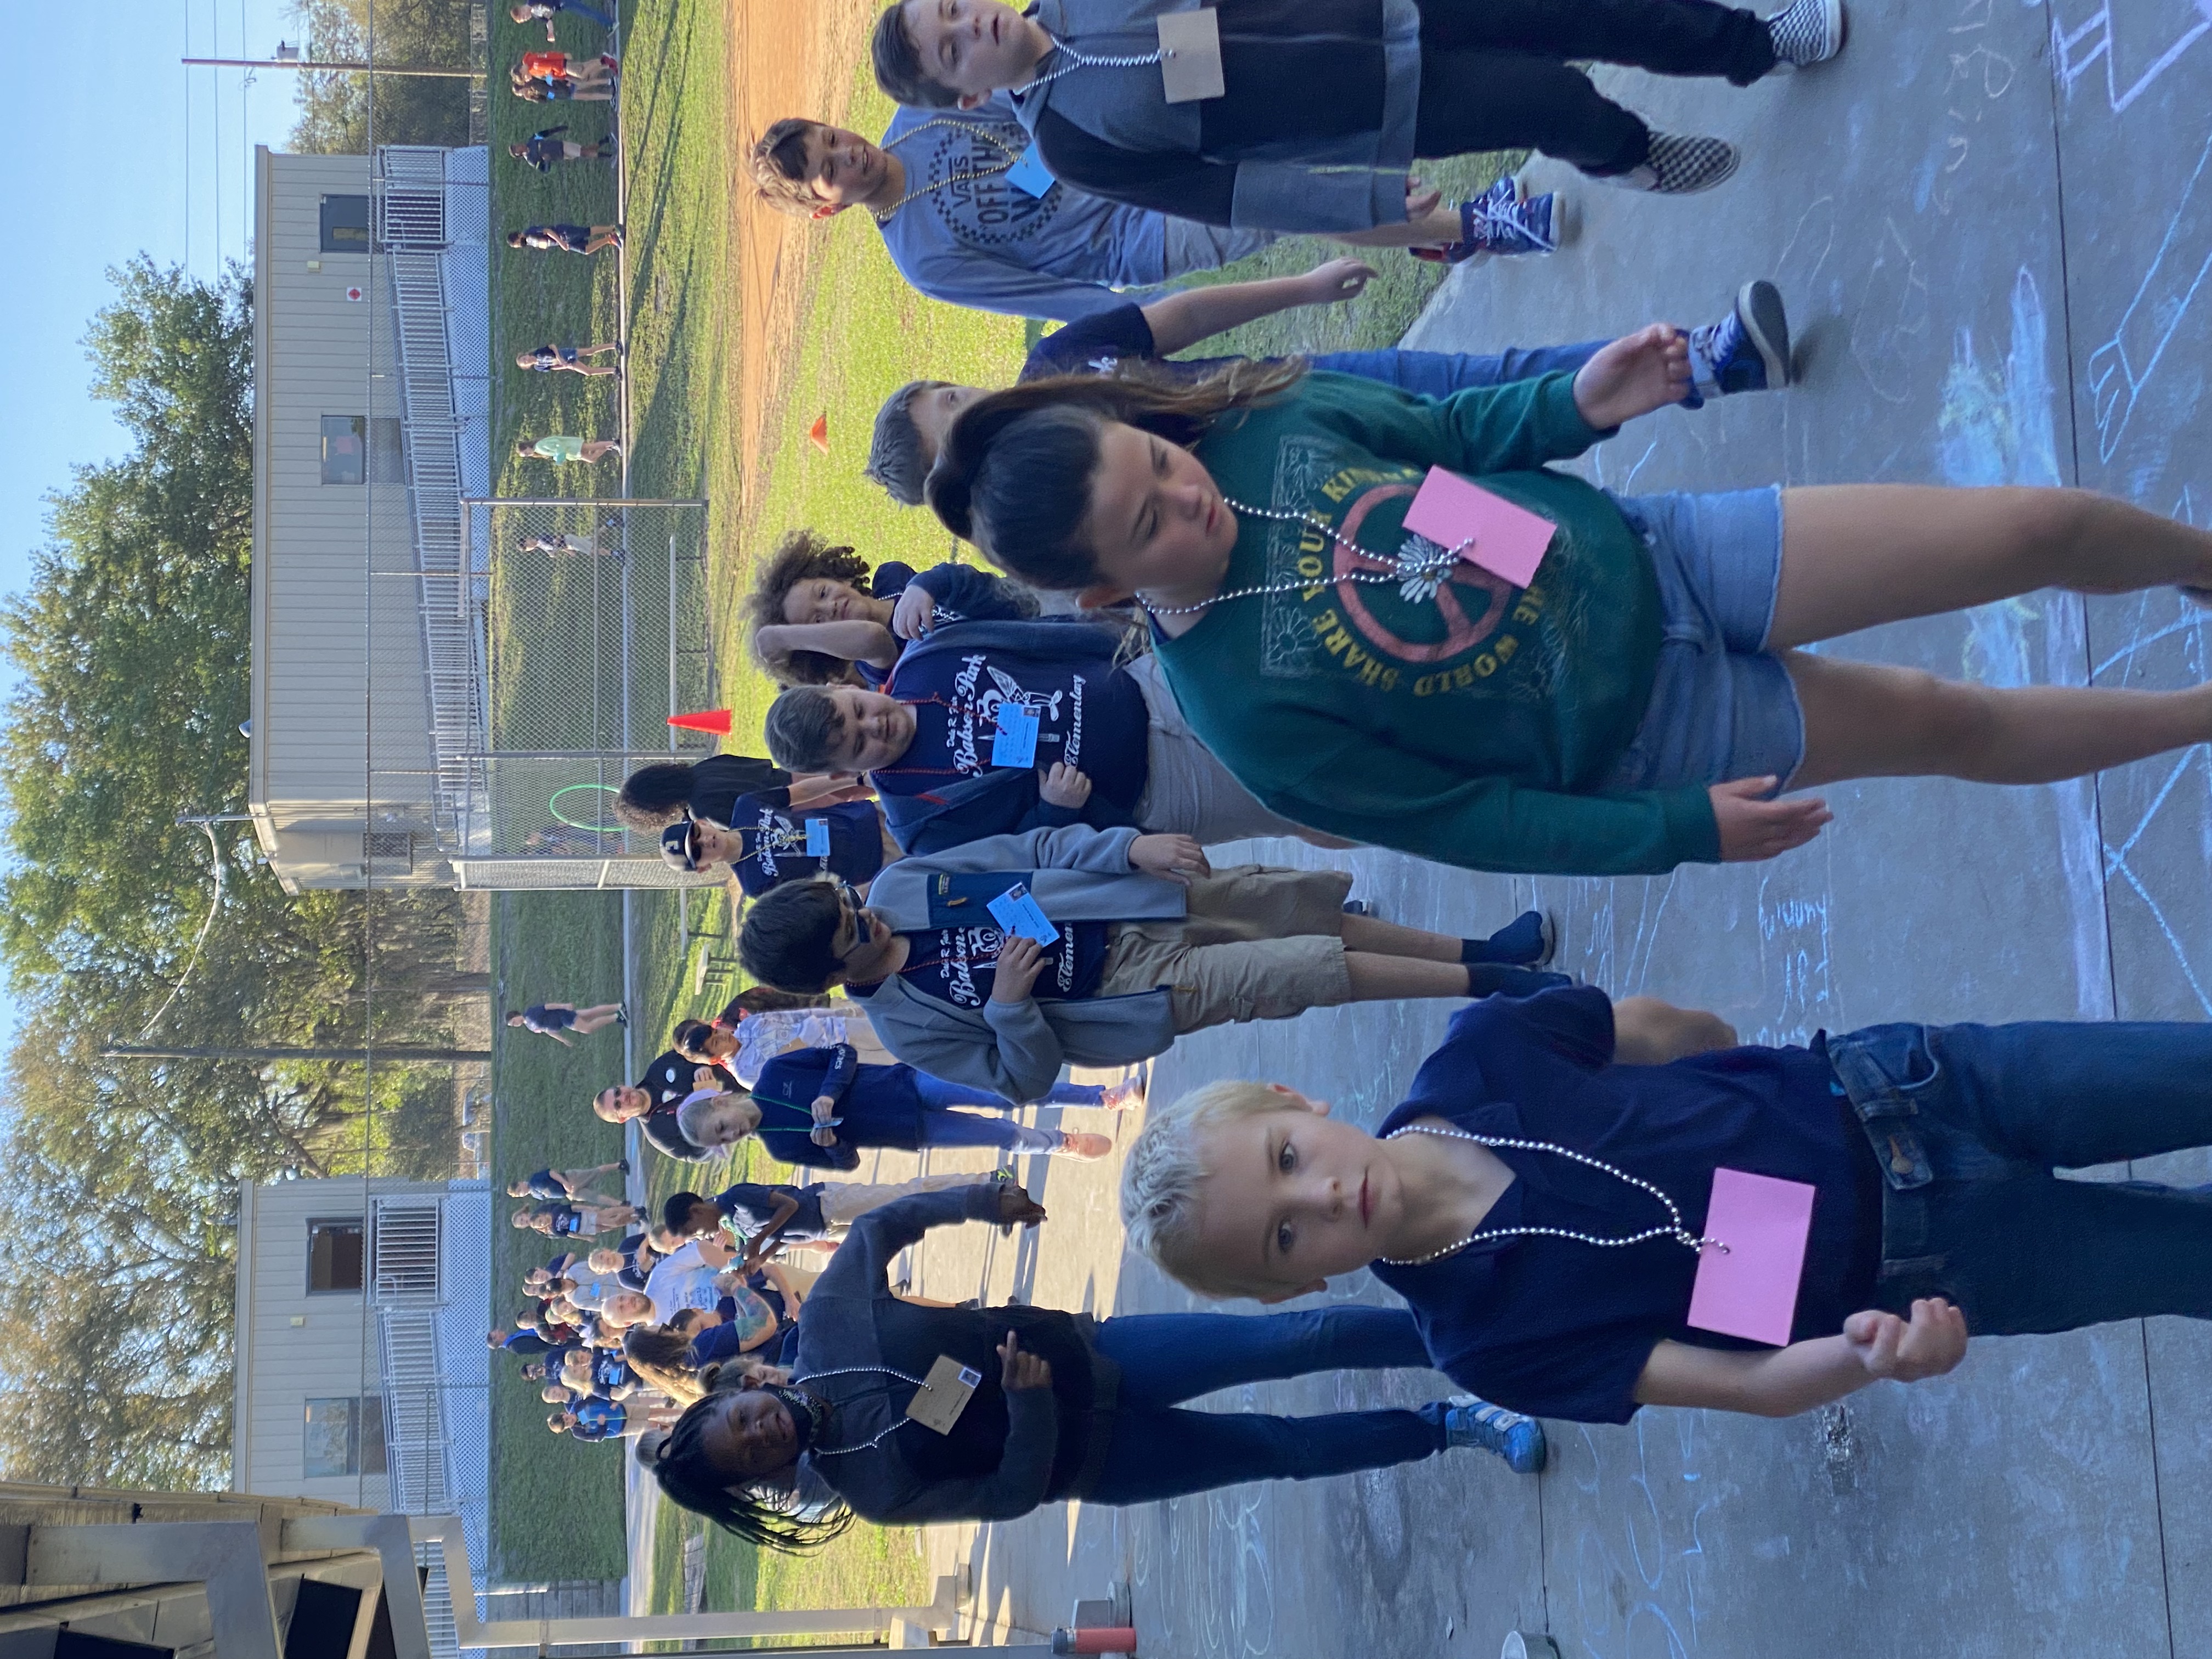 3rd, 4th, and 5th grade students walking 